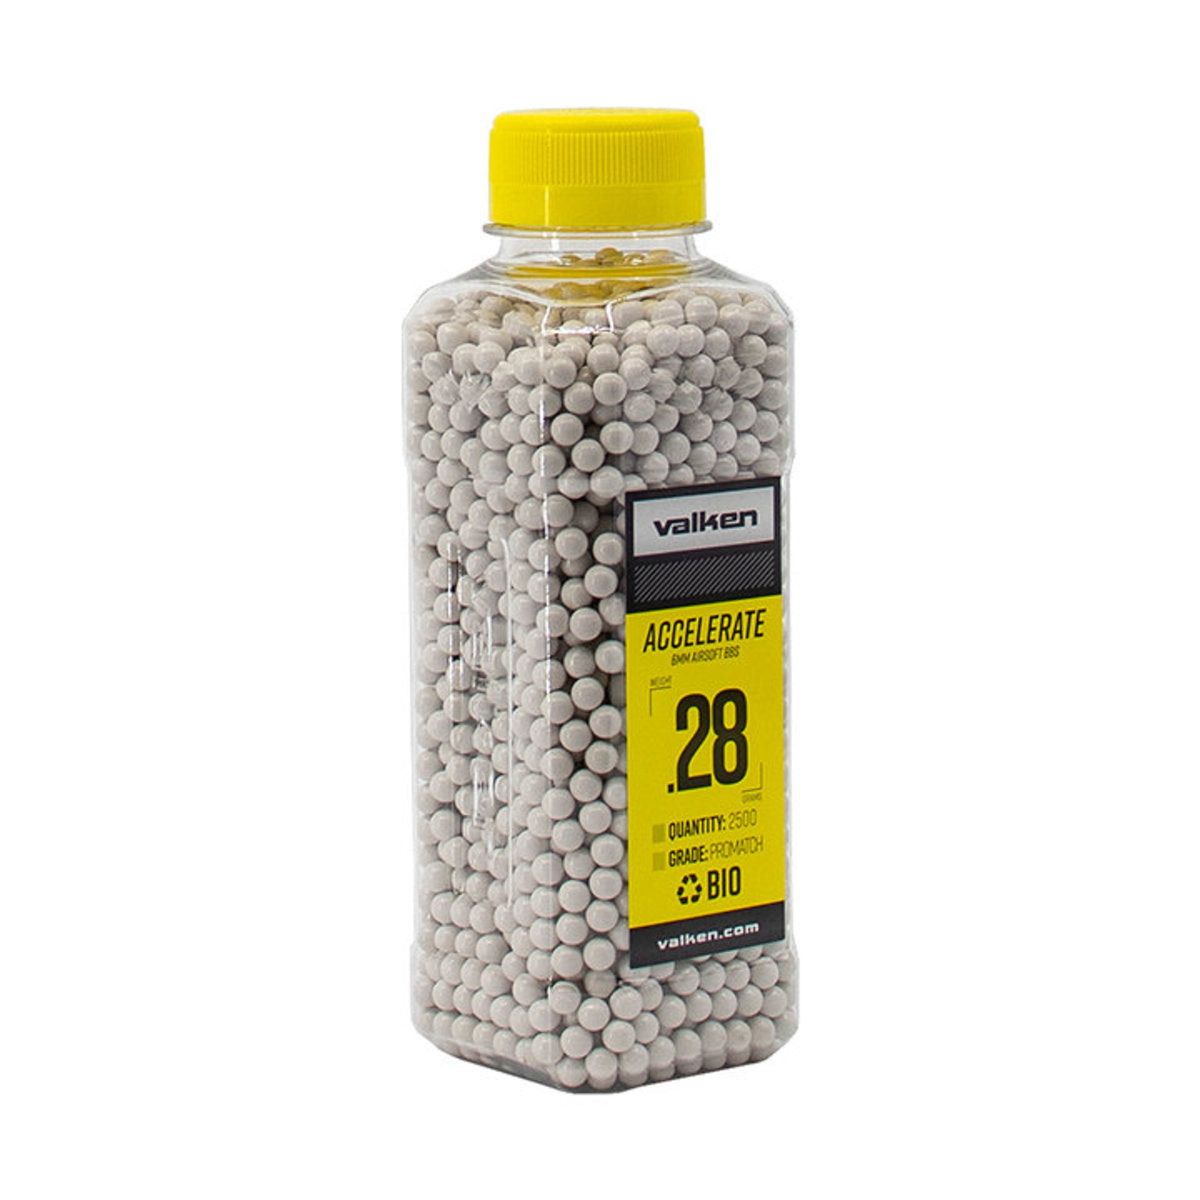 Valken Accelerate Promatch 0.28G 2,500Ct Biodegradable Airsoft Bbs